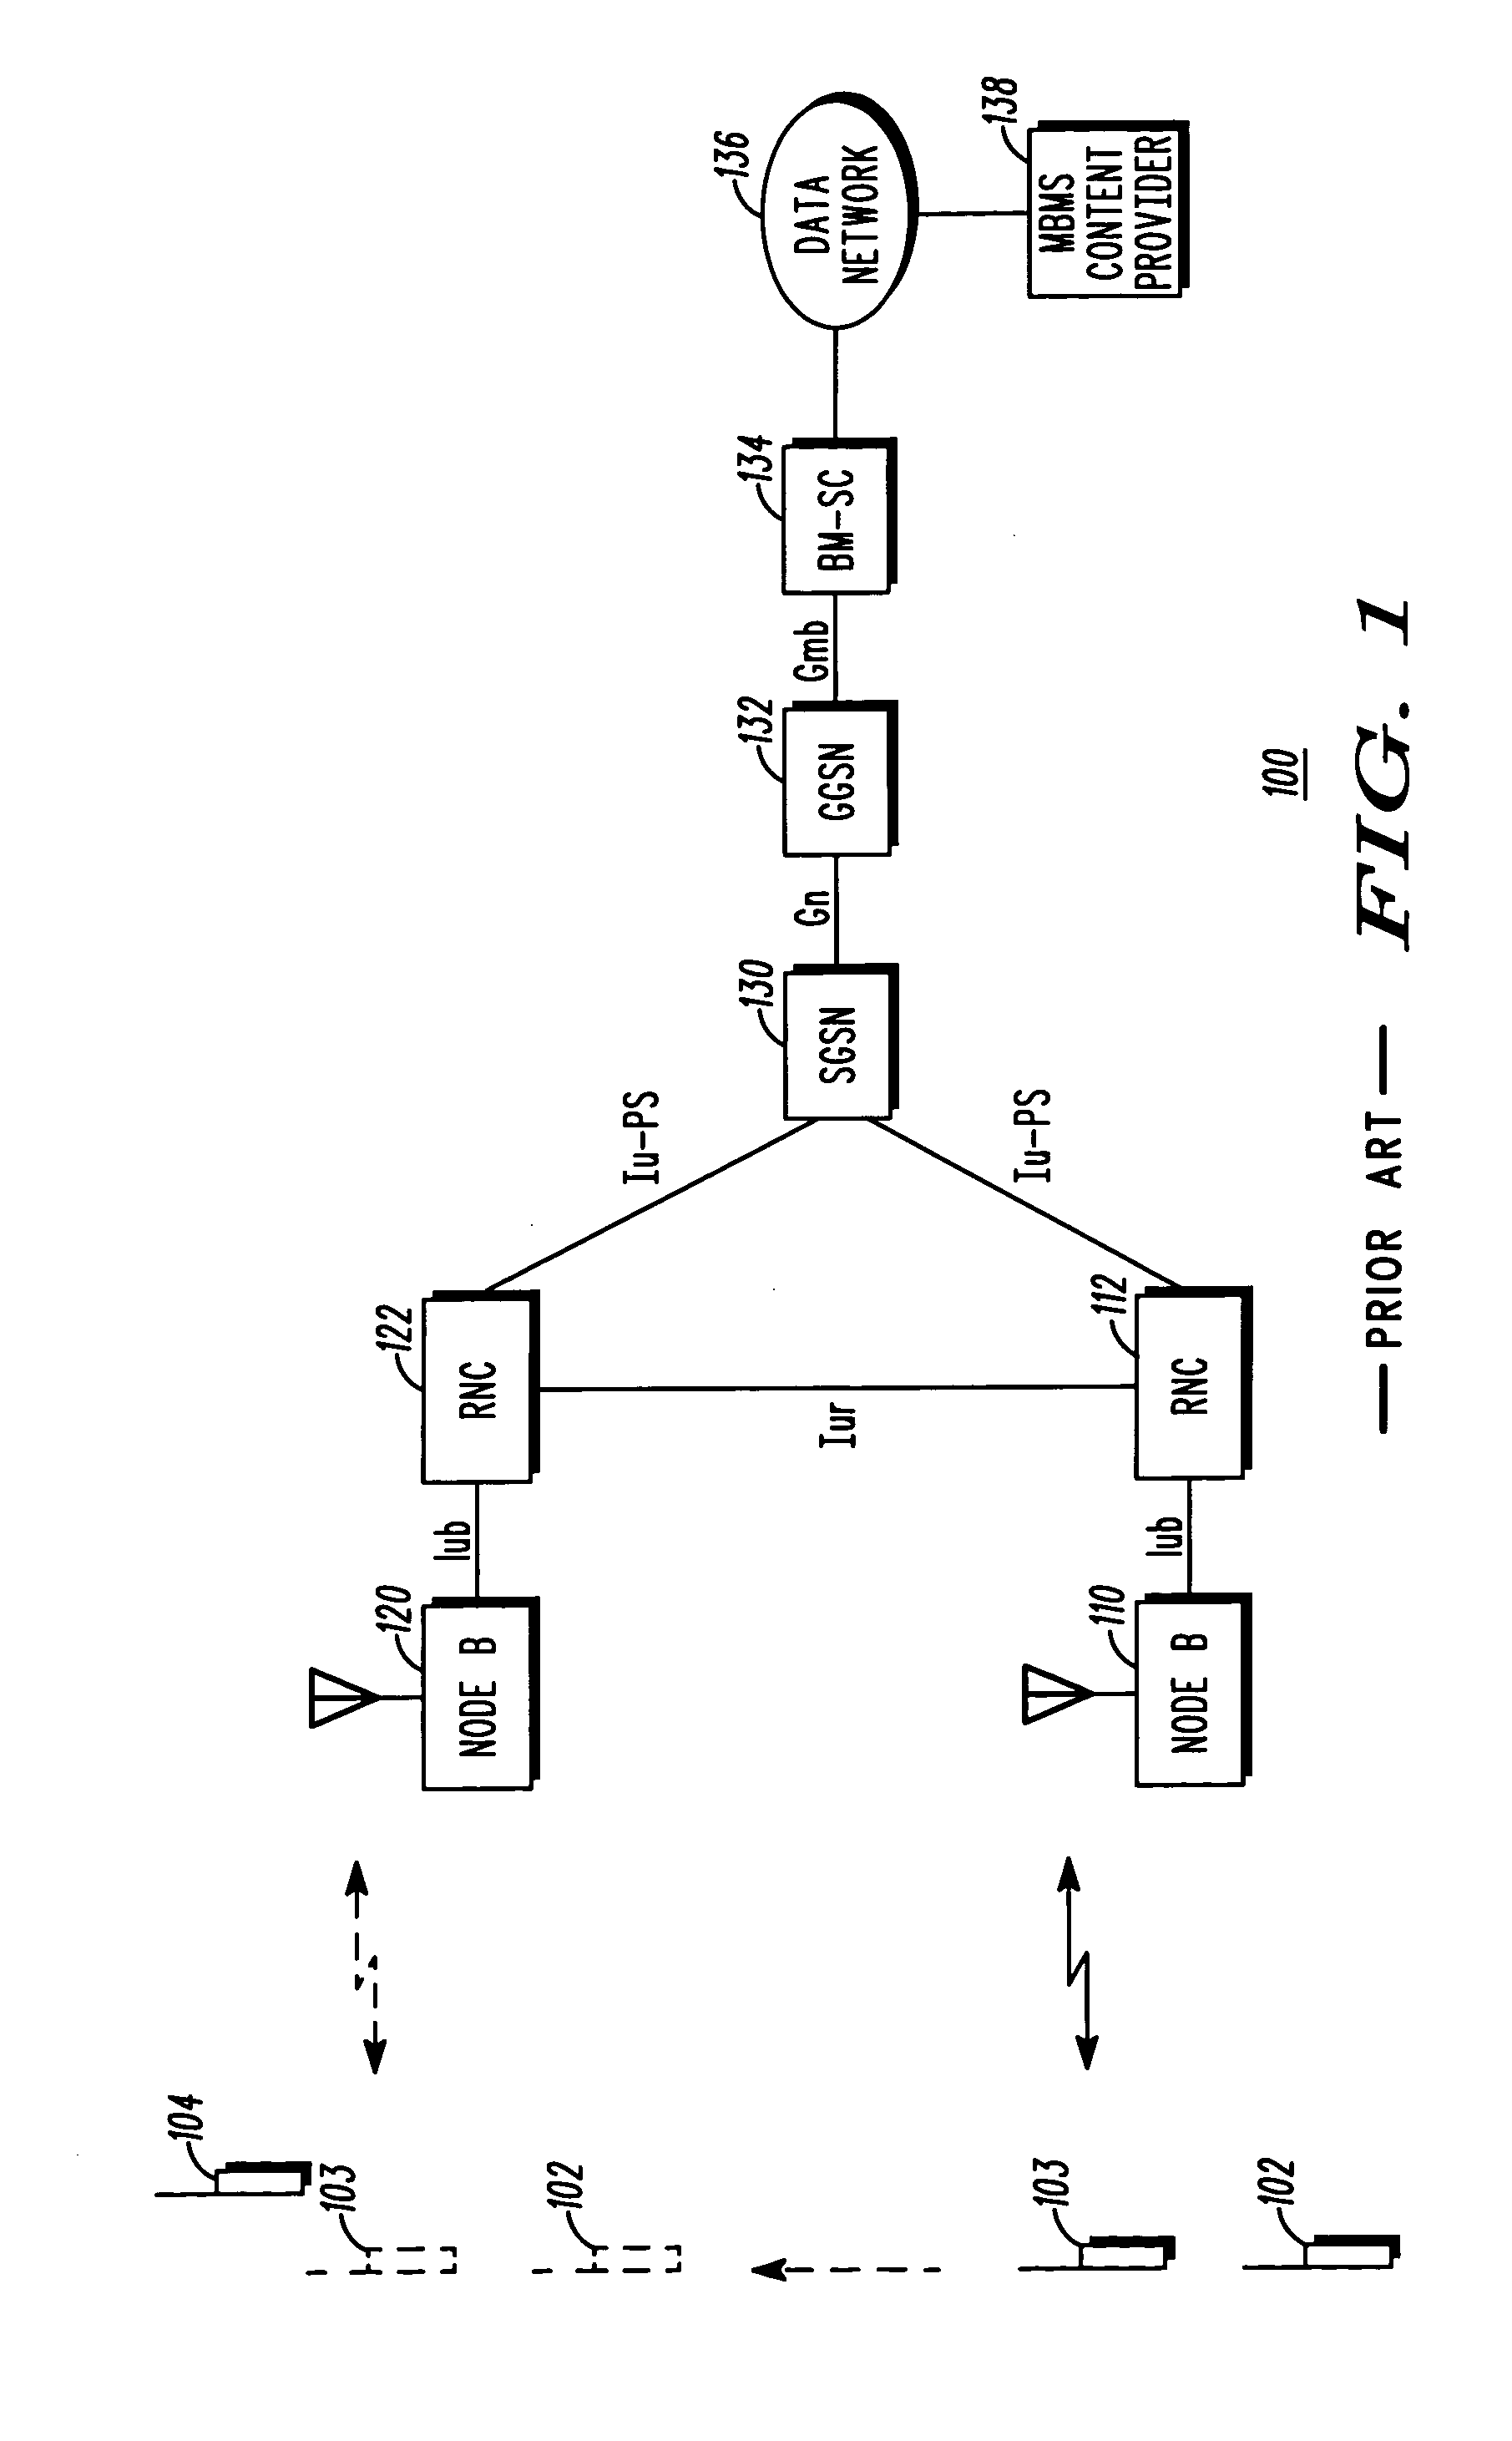 Method and apparatus for providing multimedia broadcast multicast service data to a subscriber to a multimedia broadcast multicast service